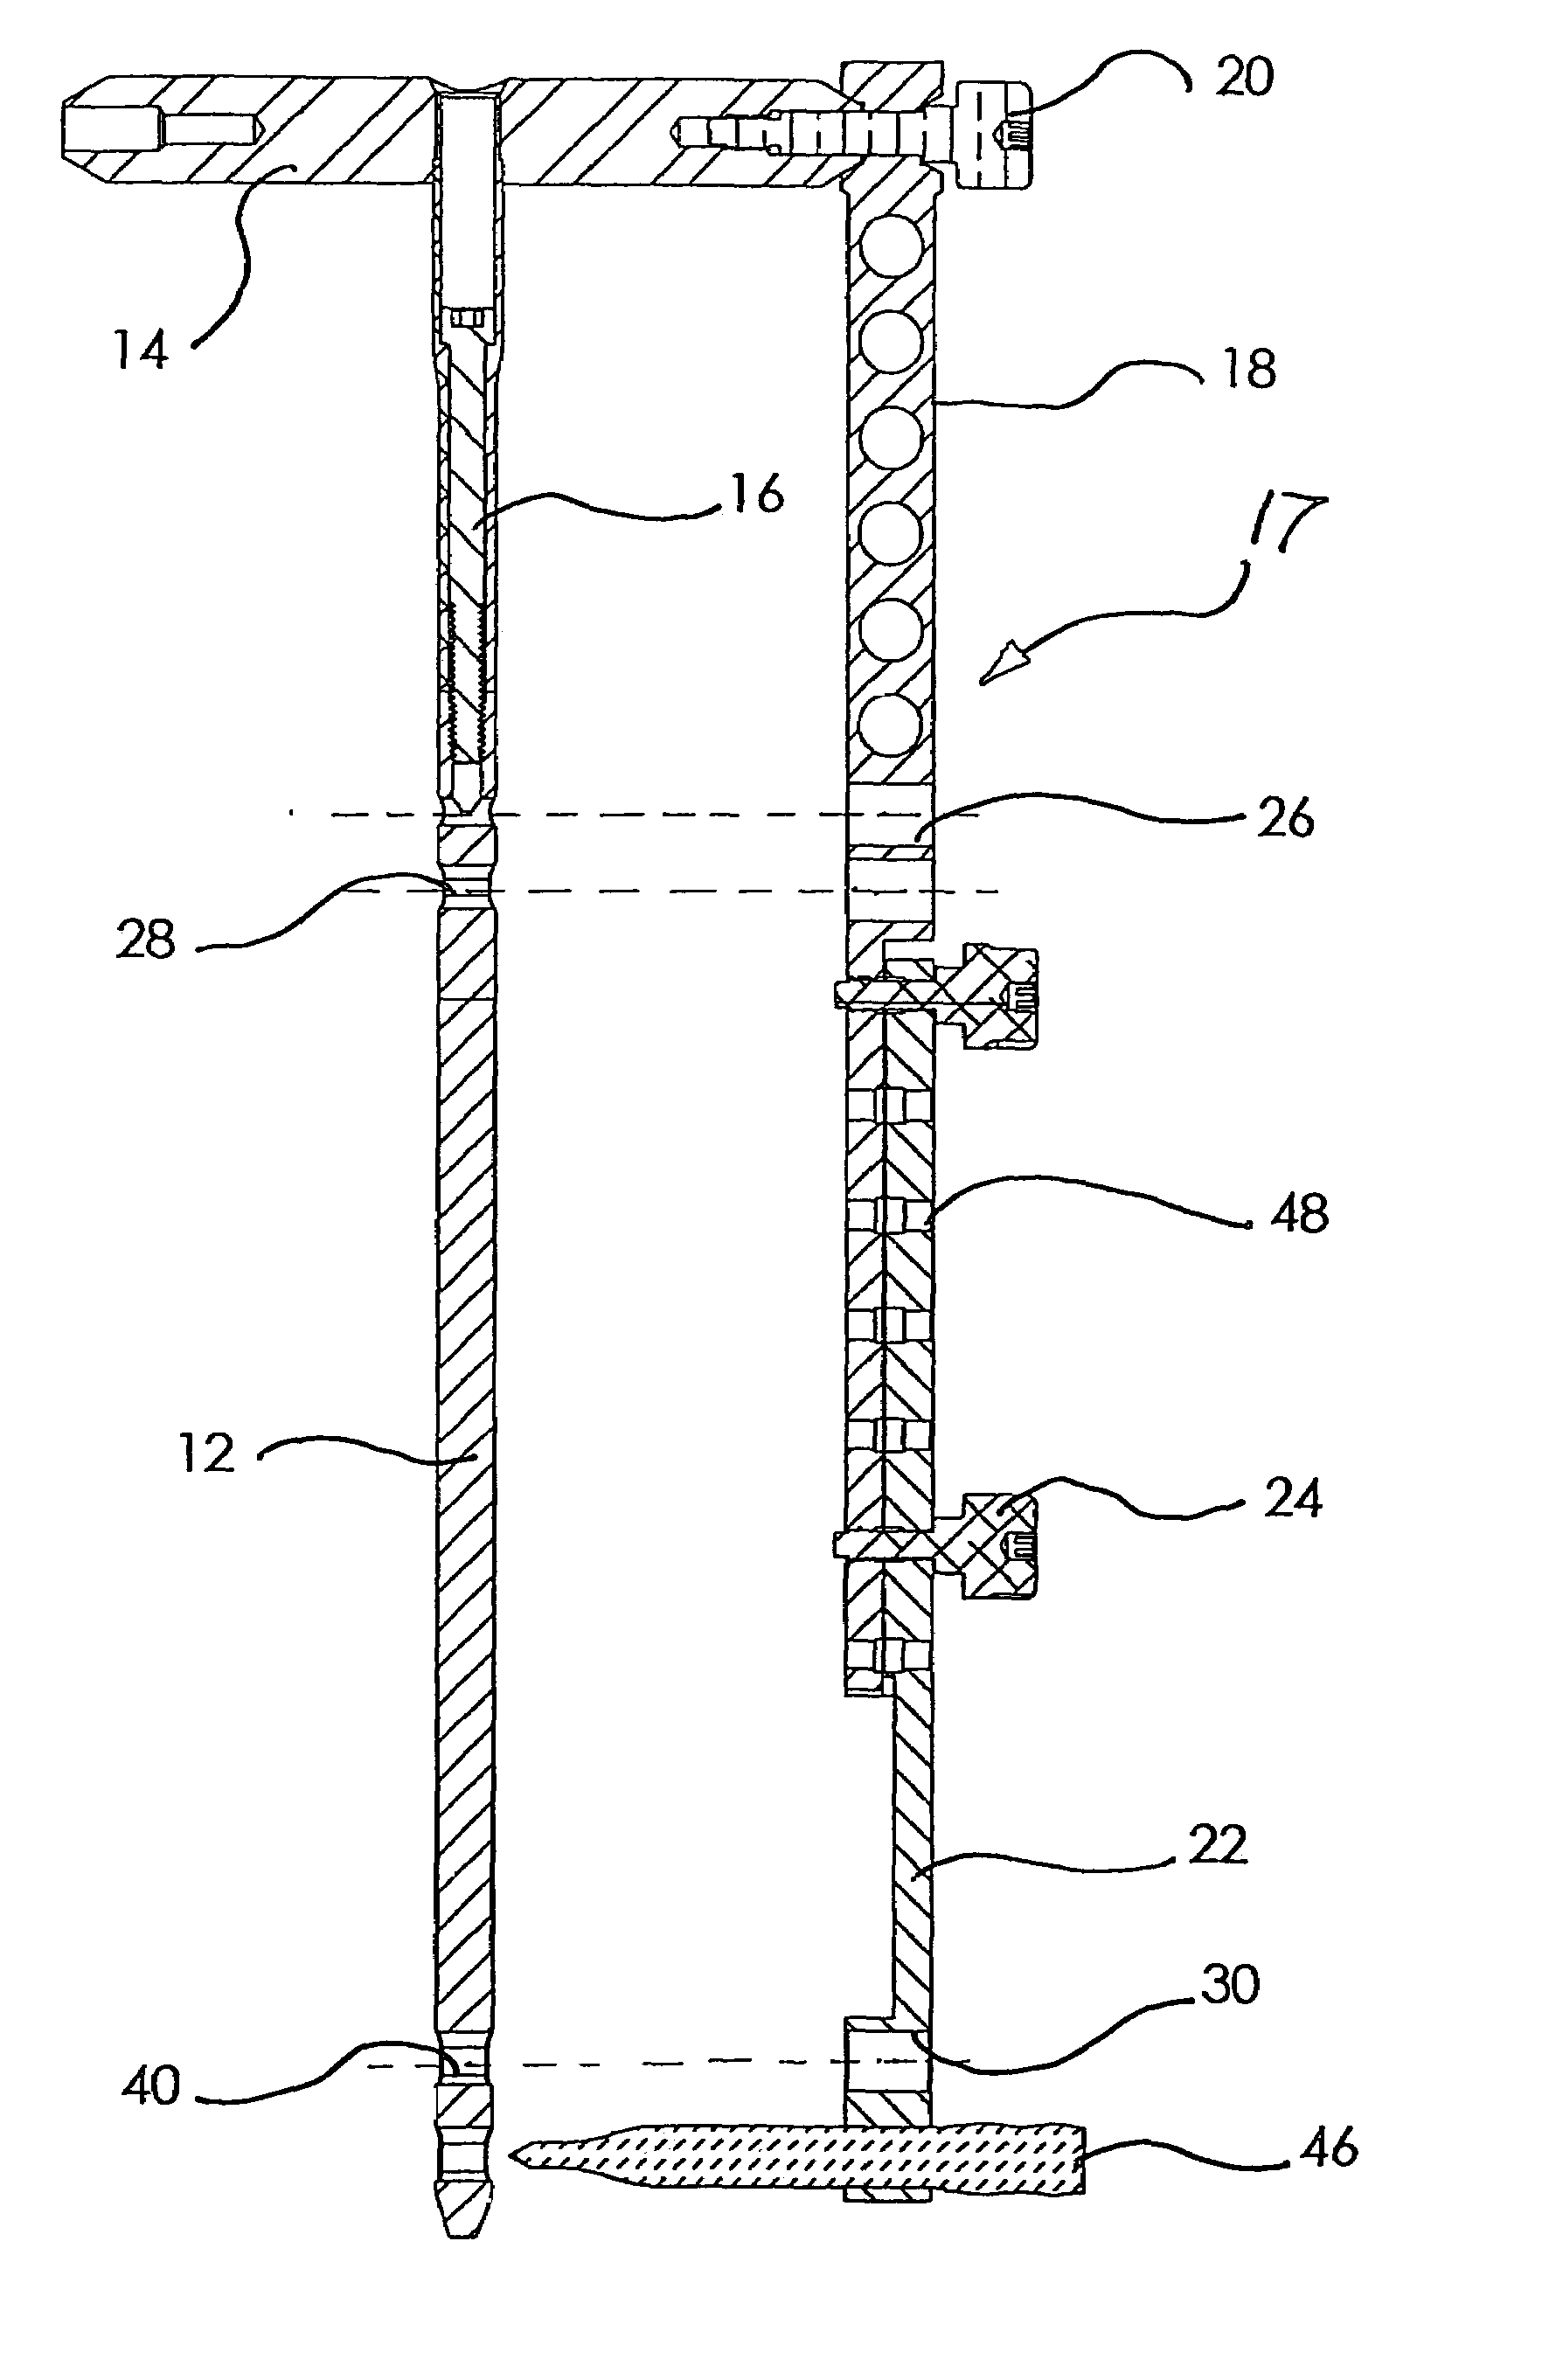 Method and apparatus for locating and stabilizing an orthopedic implant